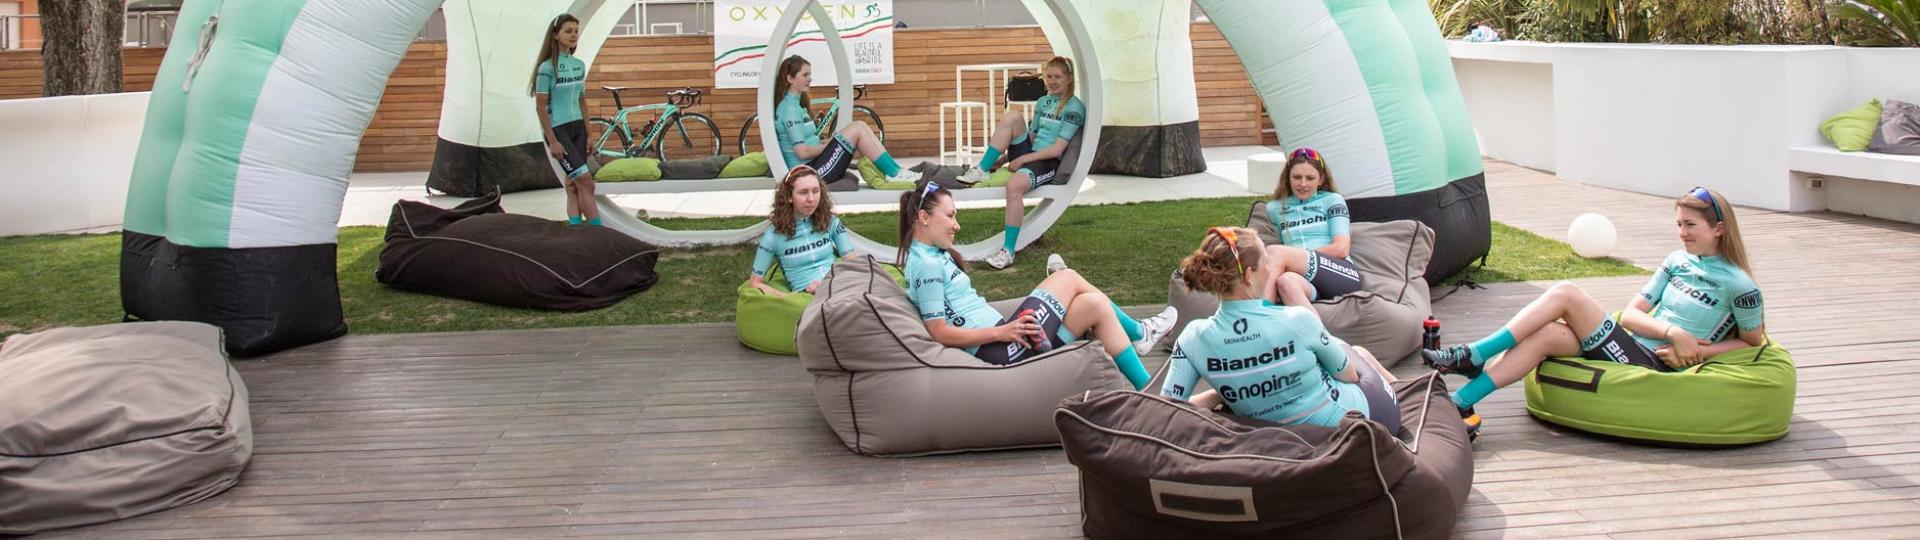 cycling.oxygenhotel it eventi-cycling-in-romagna 012